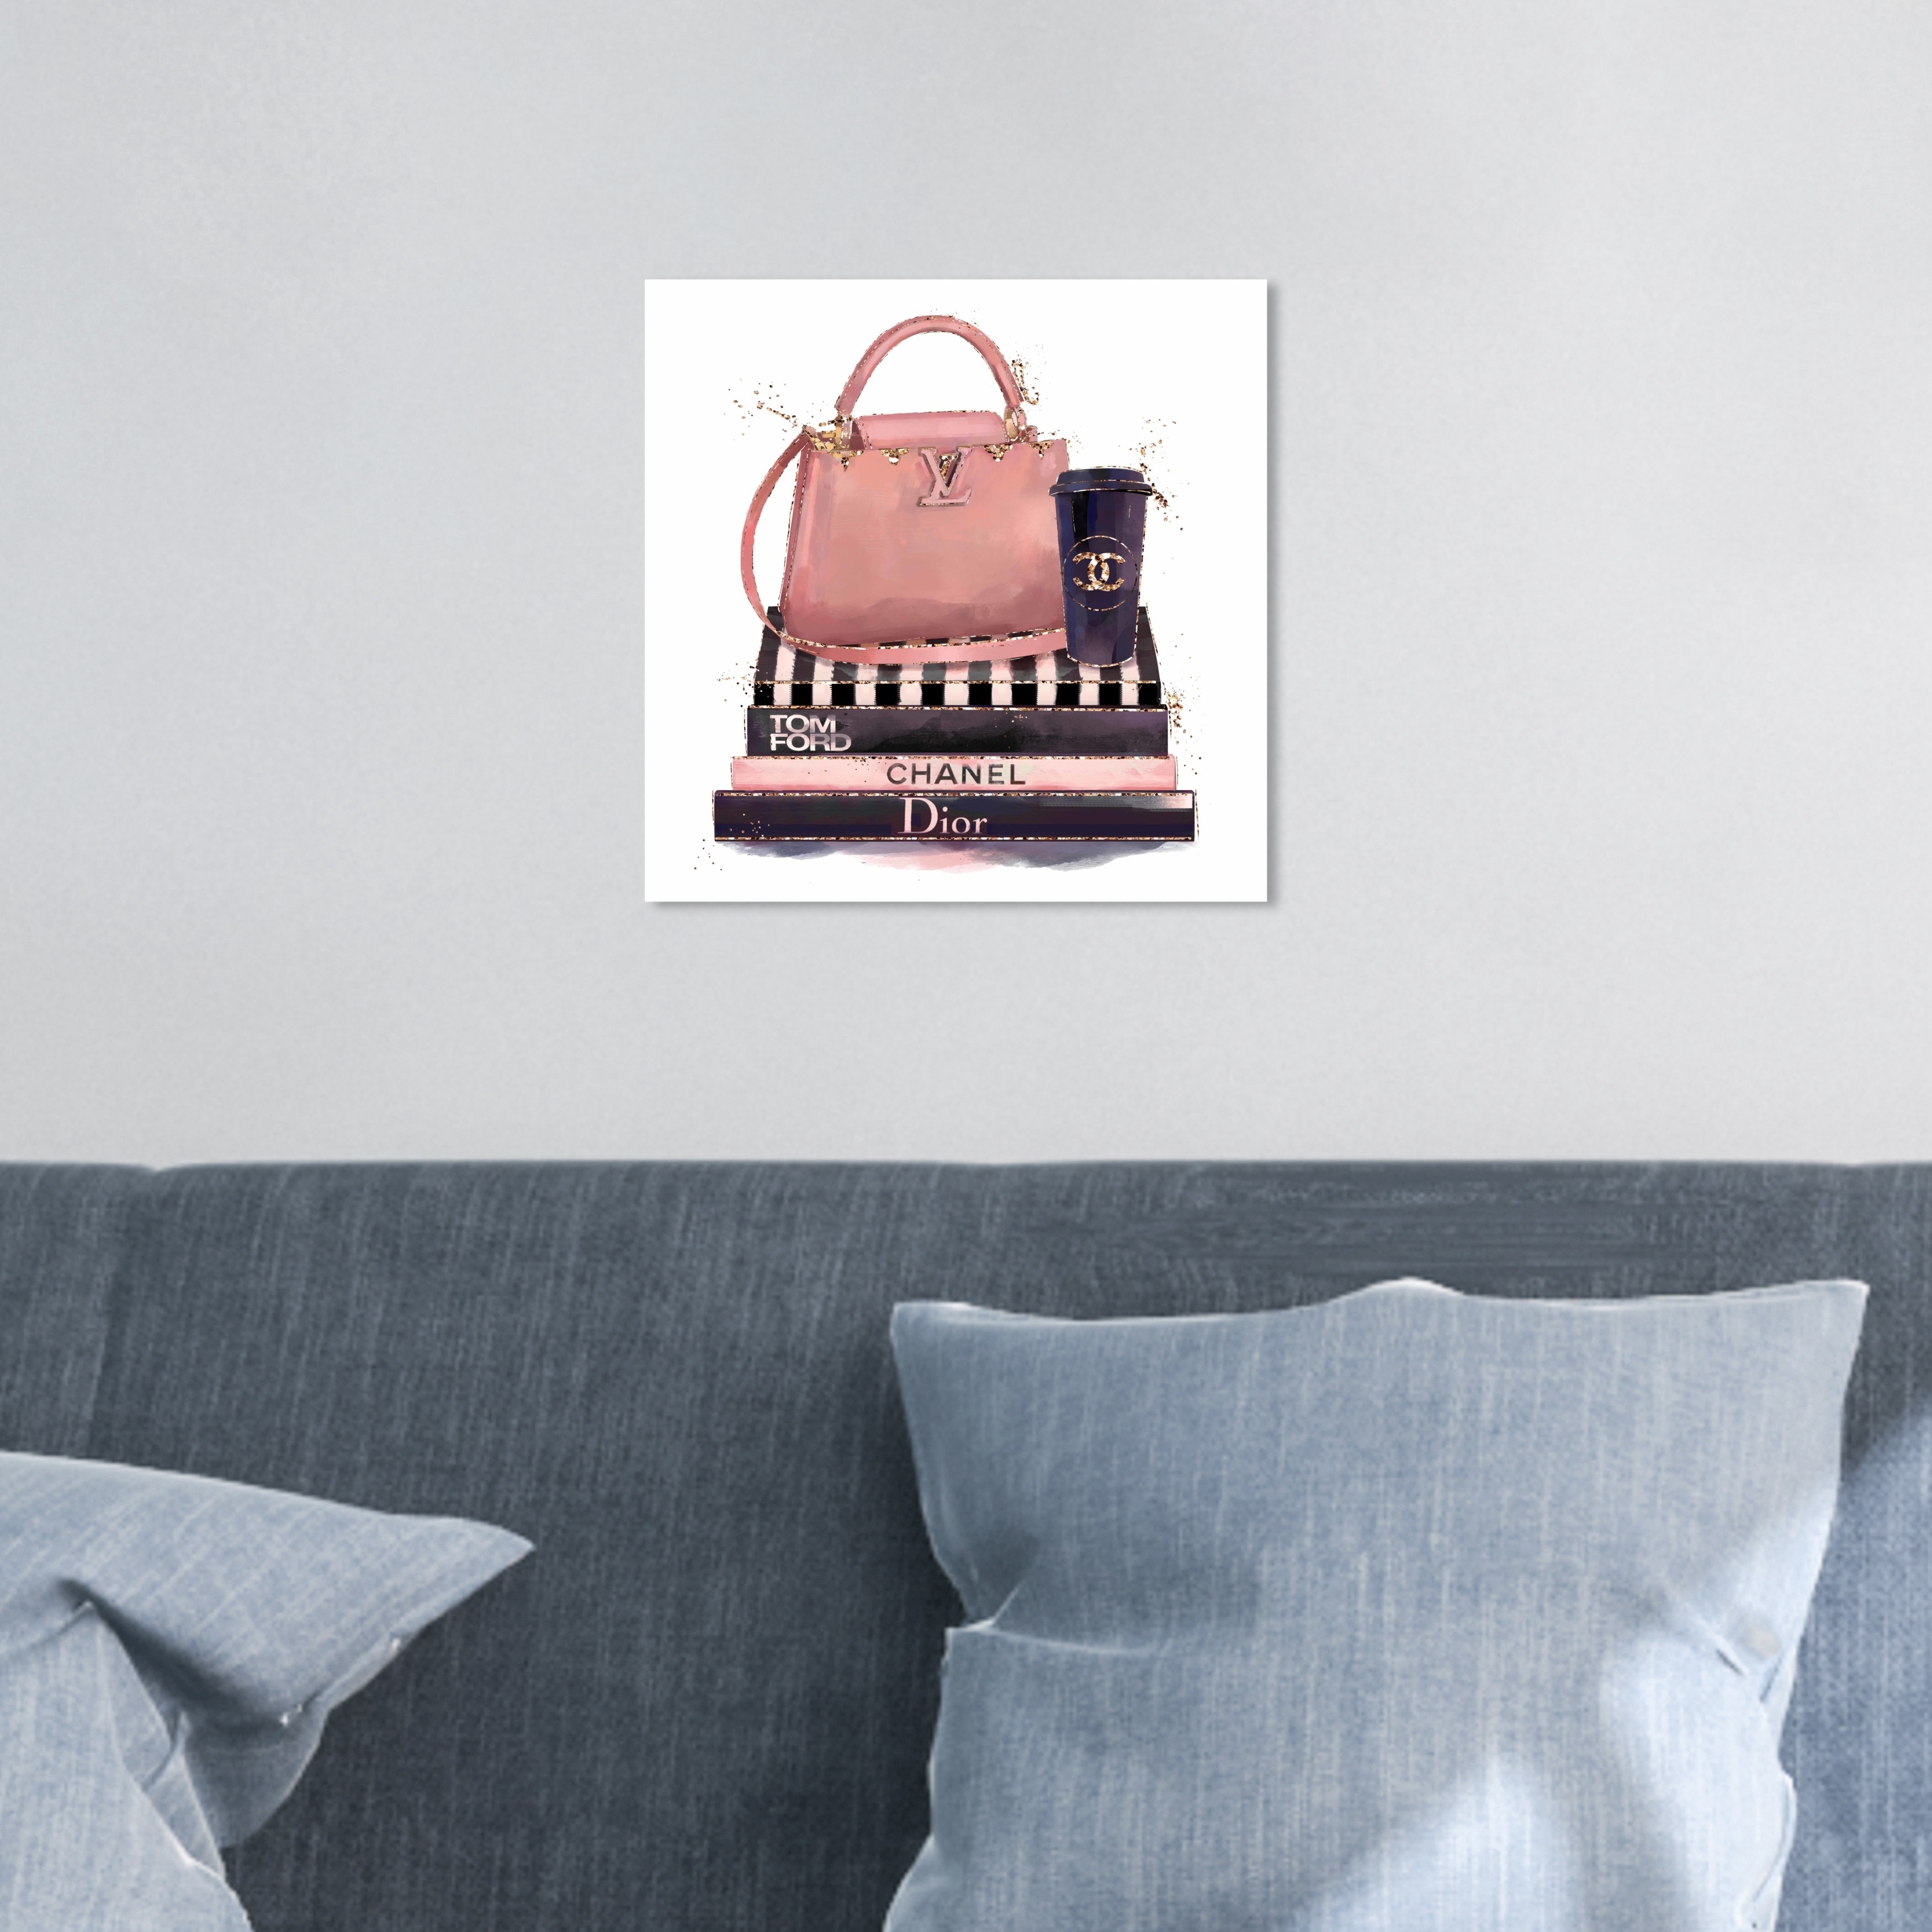  The Oliver Gal Artist Co. Fashion and Glam Wall Art Canvas  Prints '29597 Treasured Handbag' Home Décor, 12 x 12, Pink, Black:  Posters & Prints